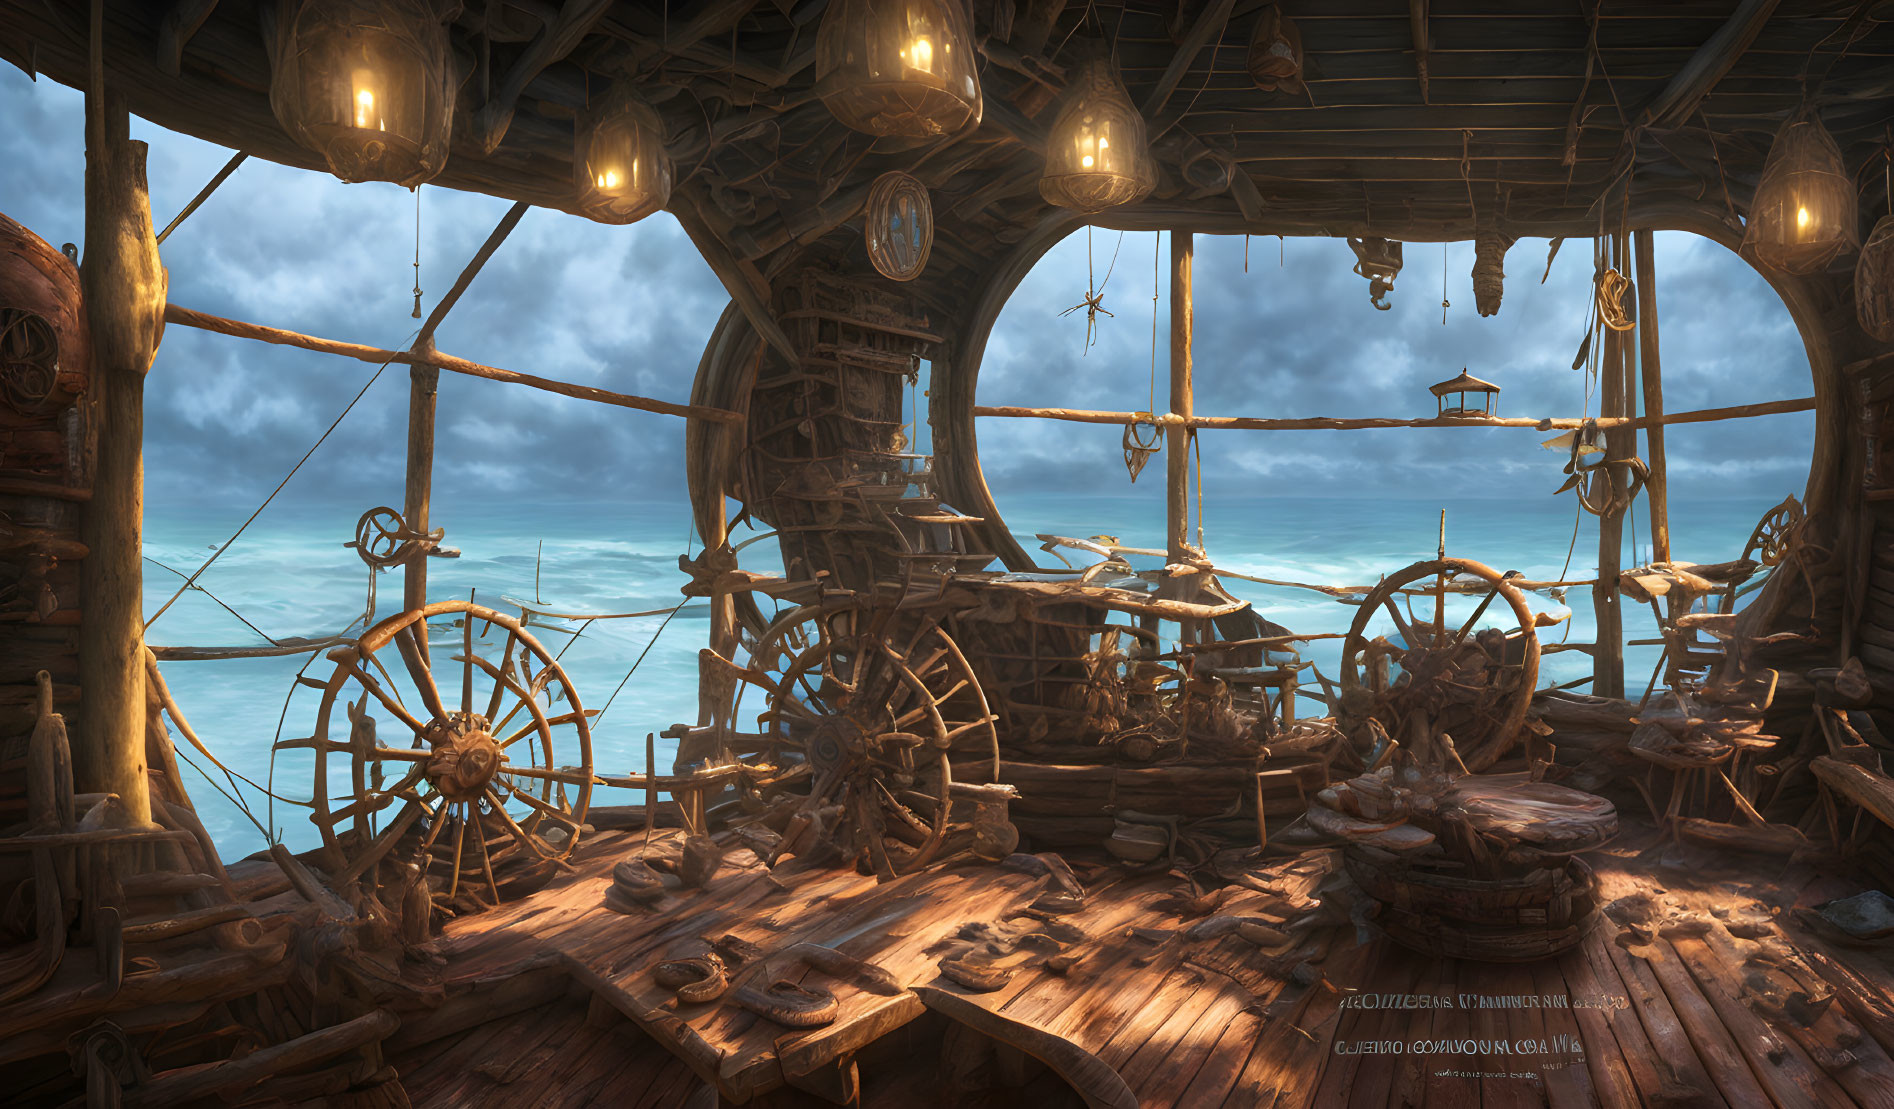 Wooden ship steering deck with multiple wheels and lanterns overlooking calm sea at dusk with distant lighthouse